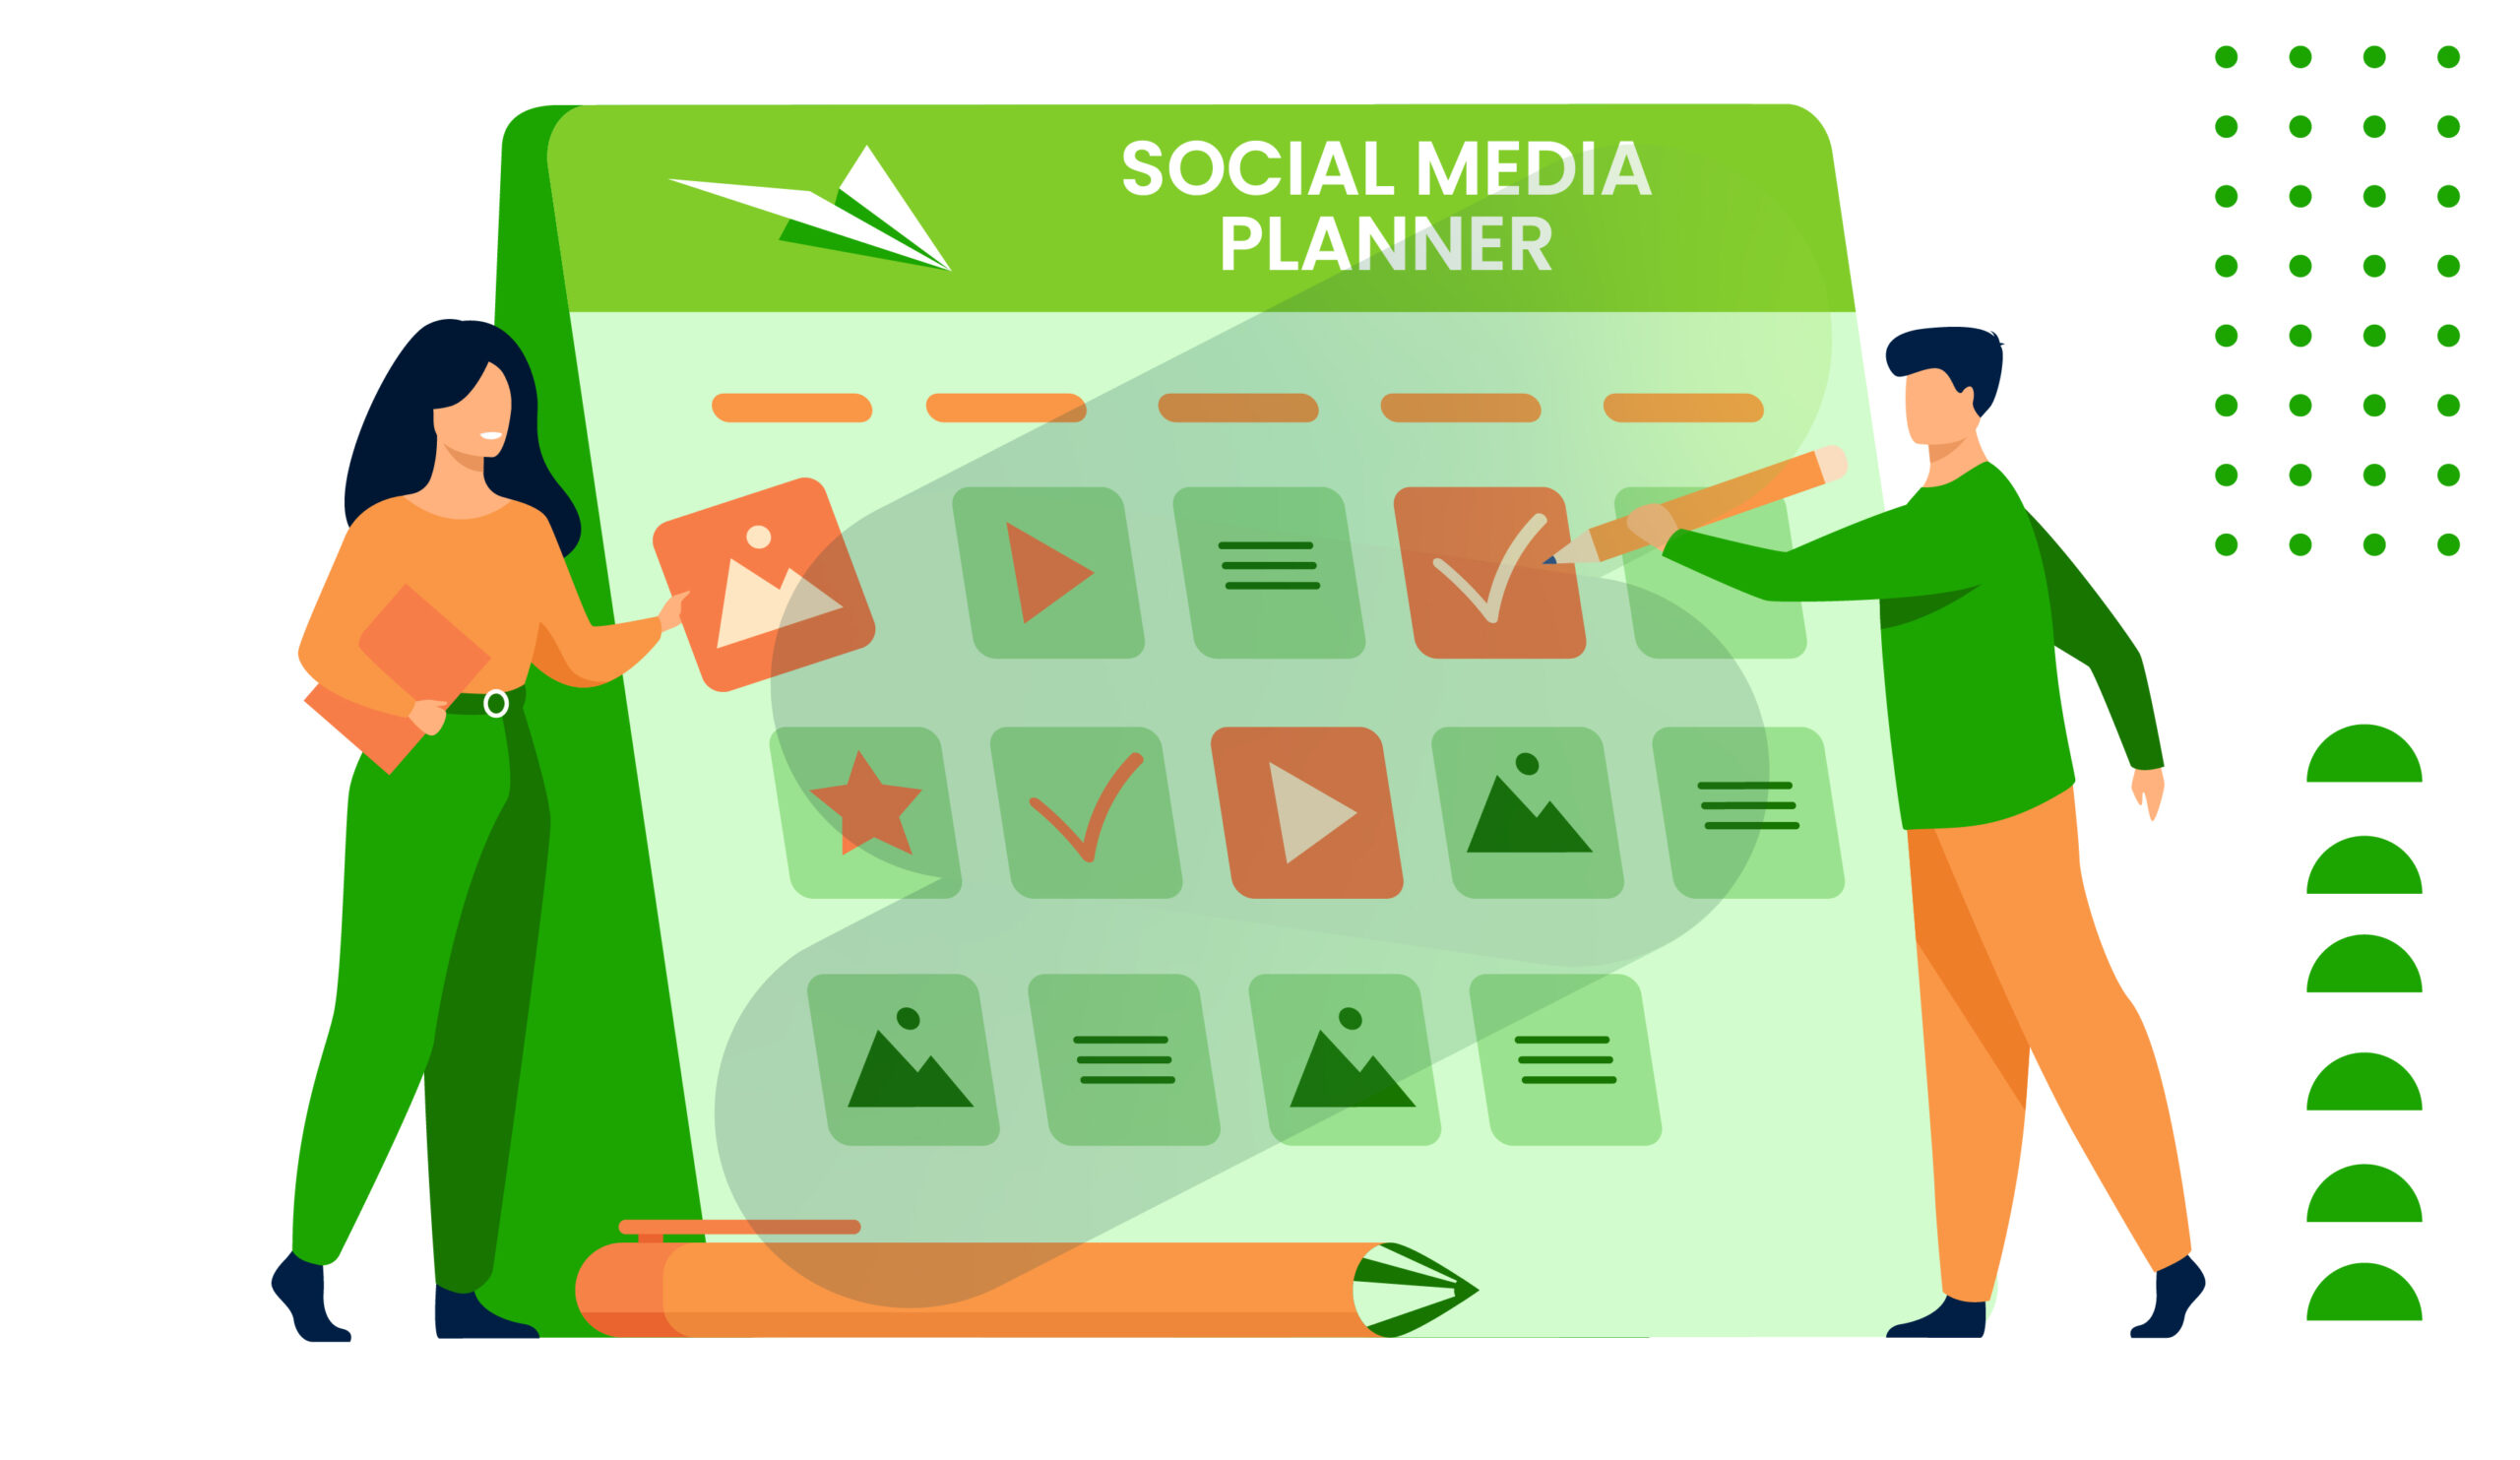 We are sure you have not maintained a perfect social media calendar